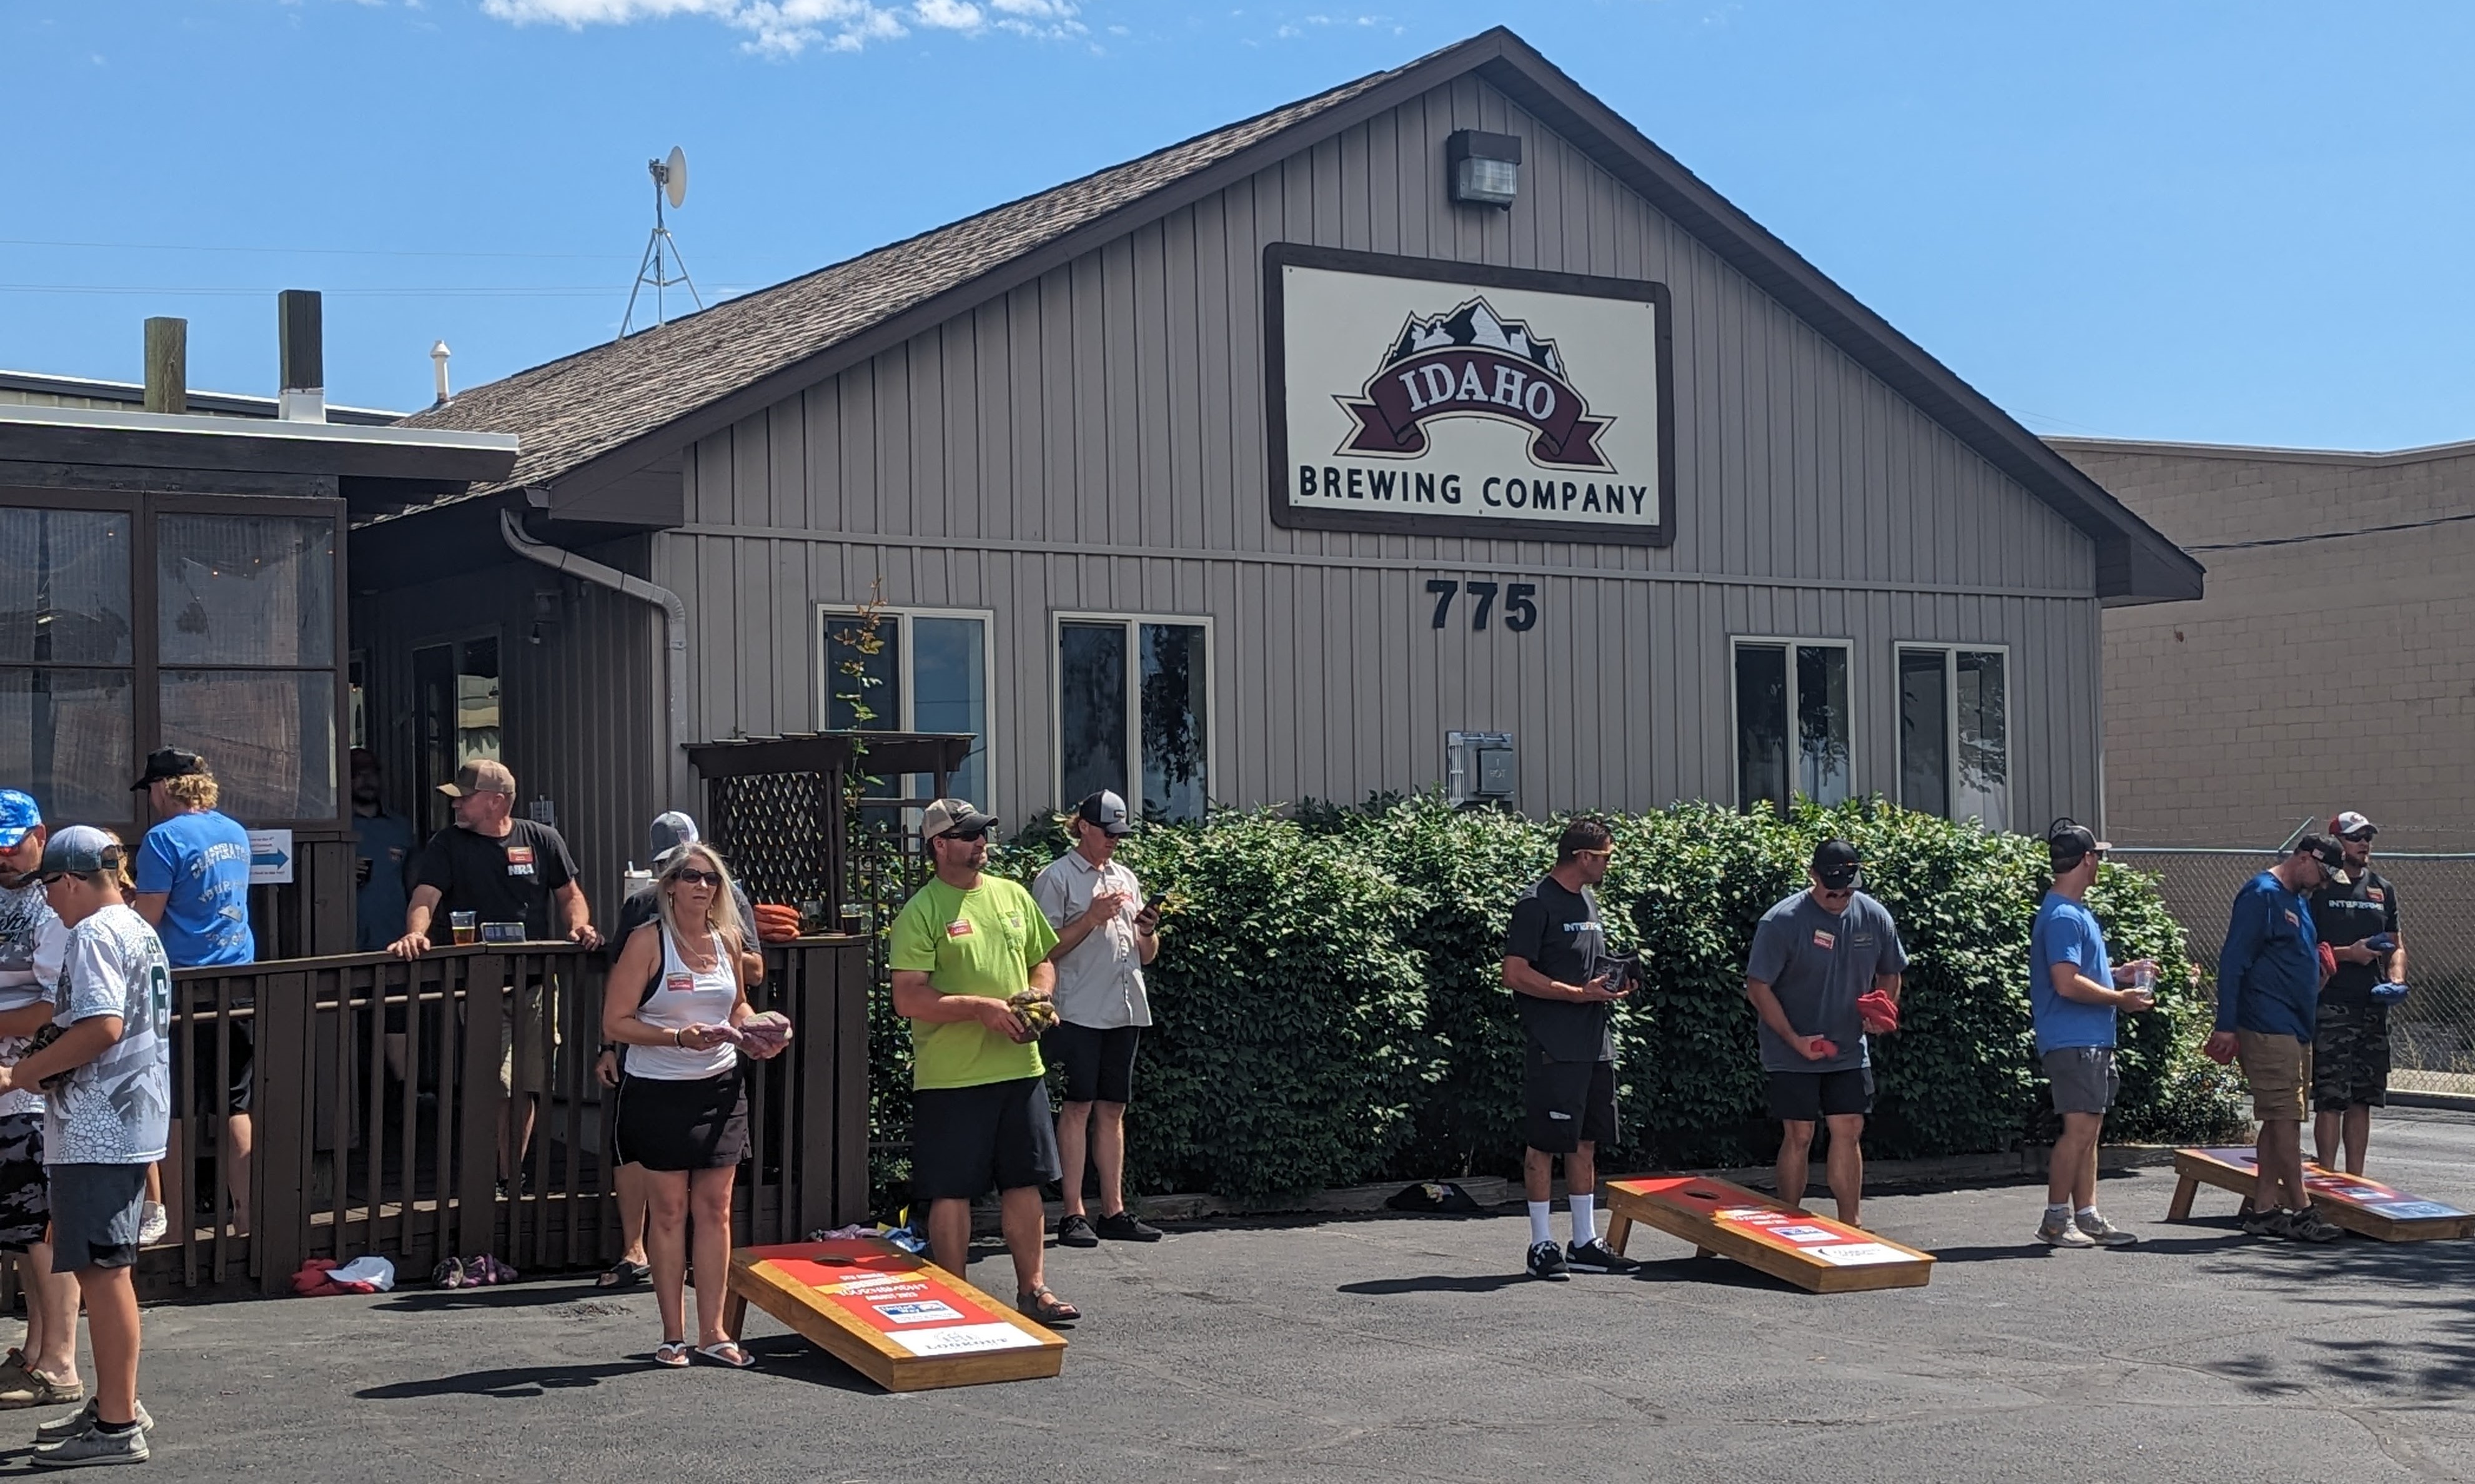 Participants of the cornhole tournament playing.